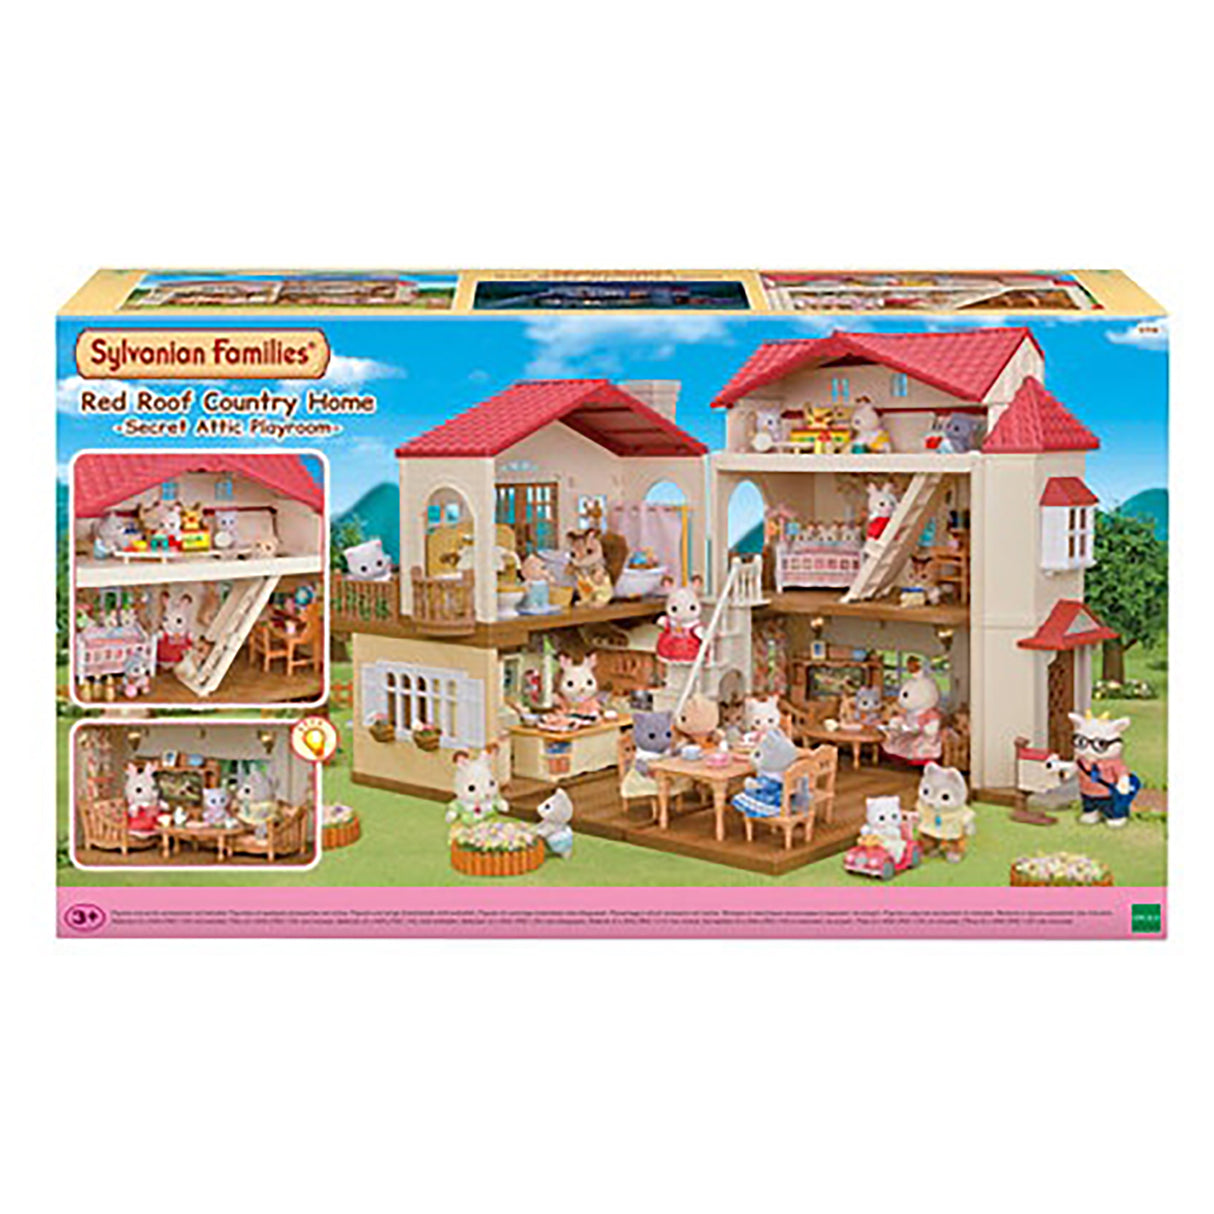 Sylvanian Families Red Roof Country Home with Attic